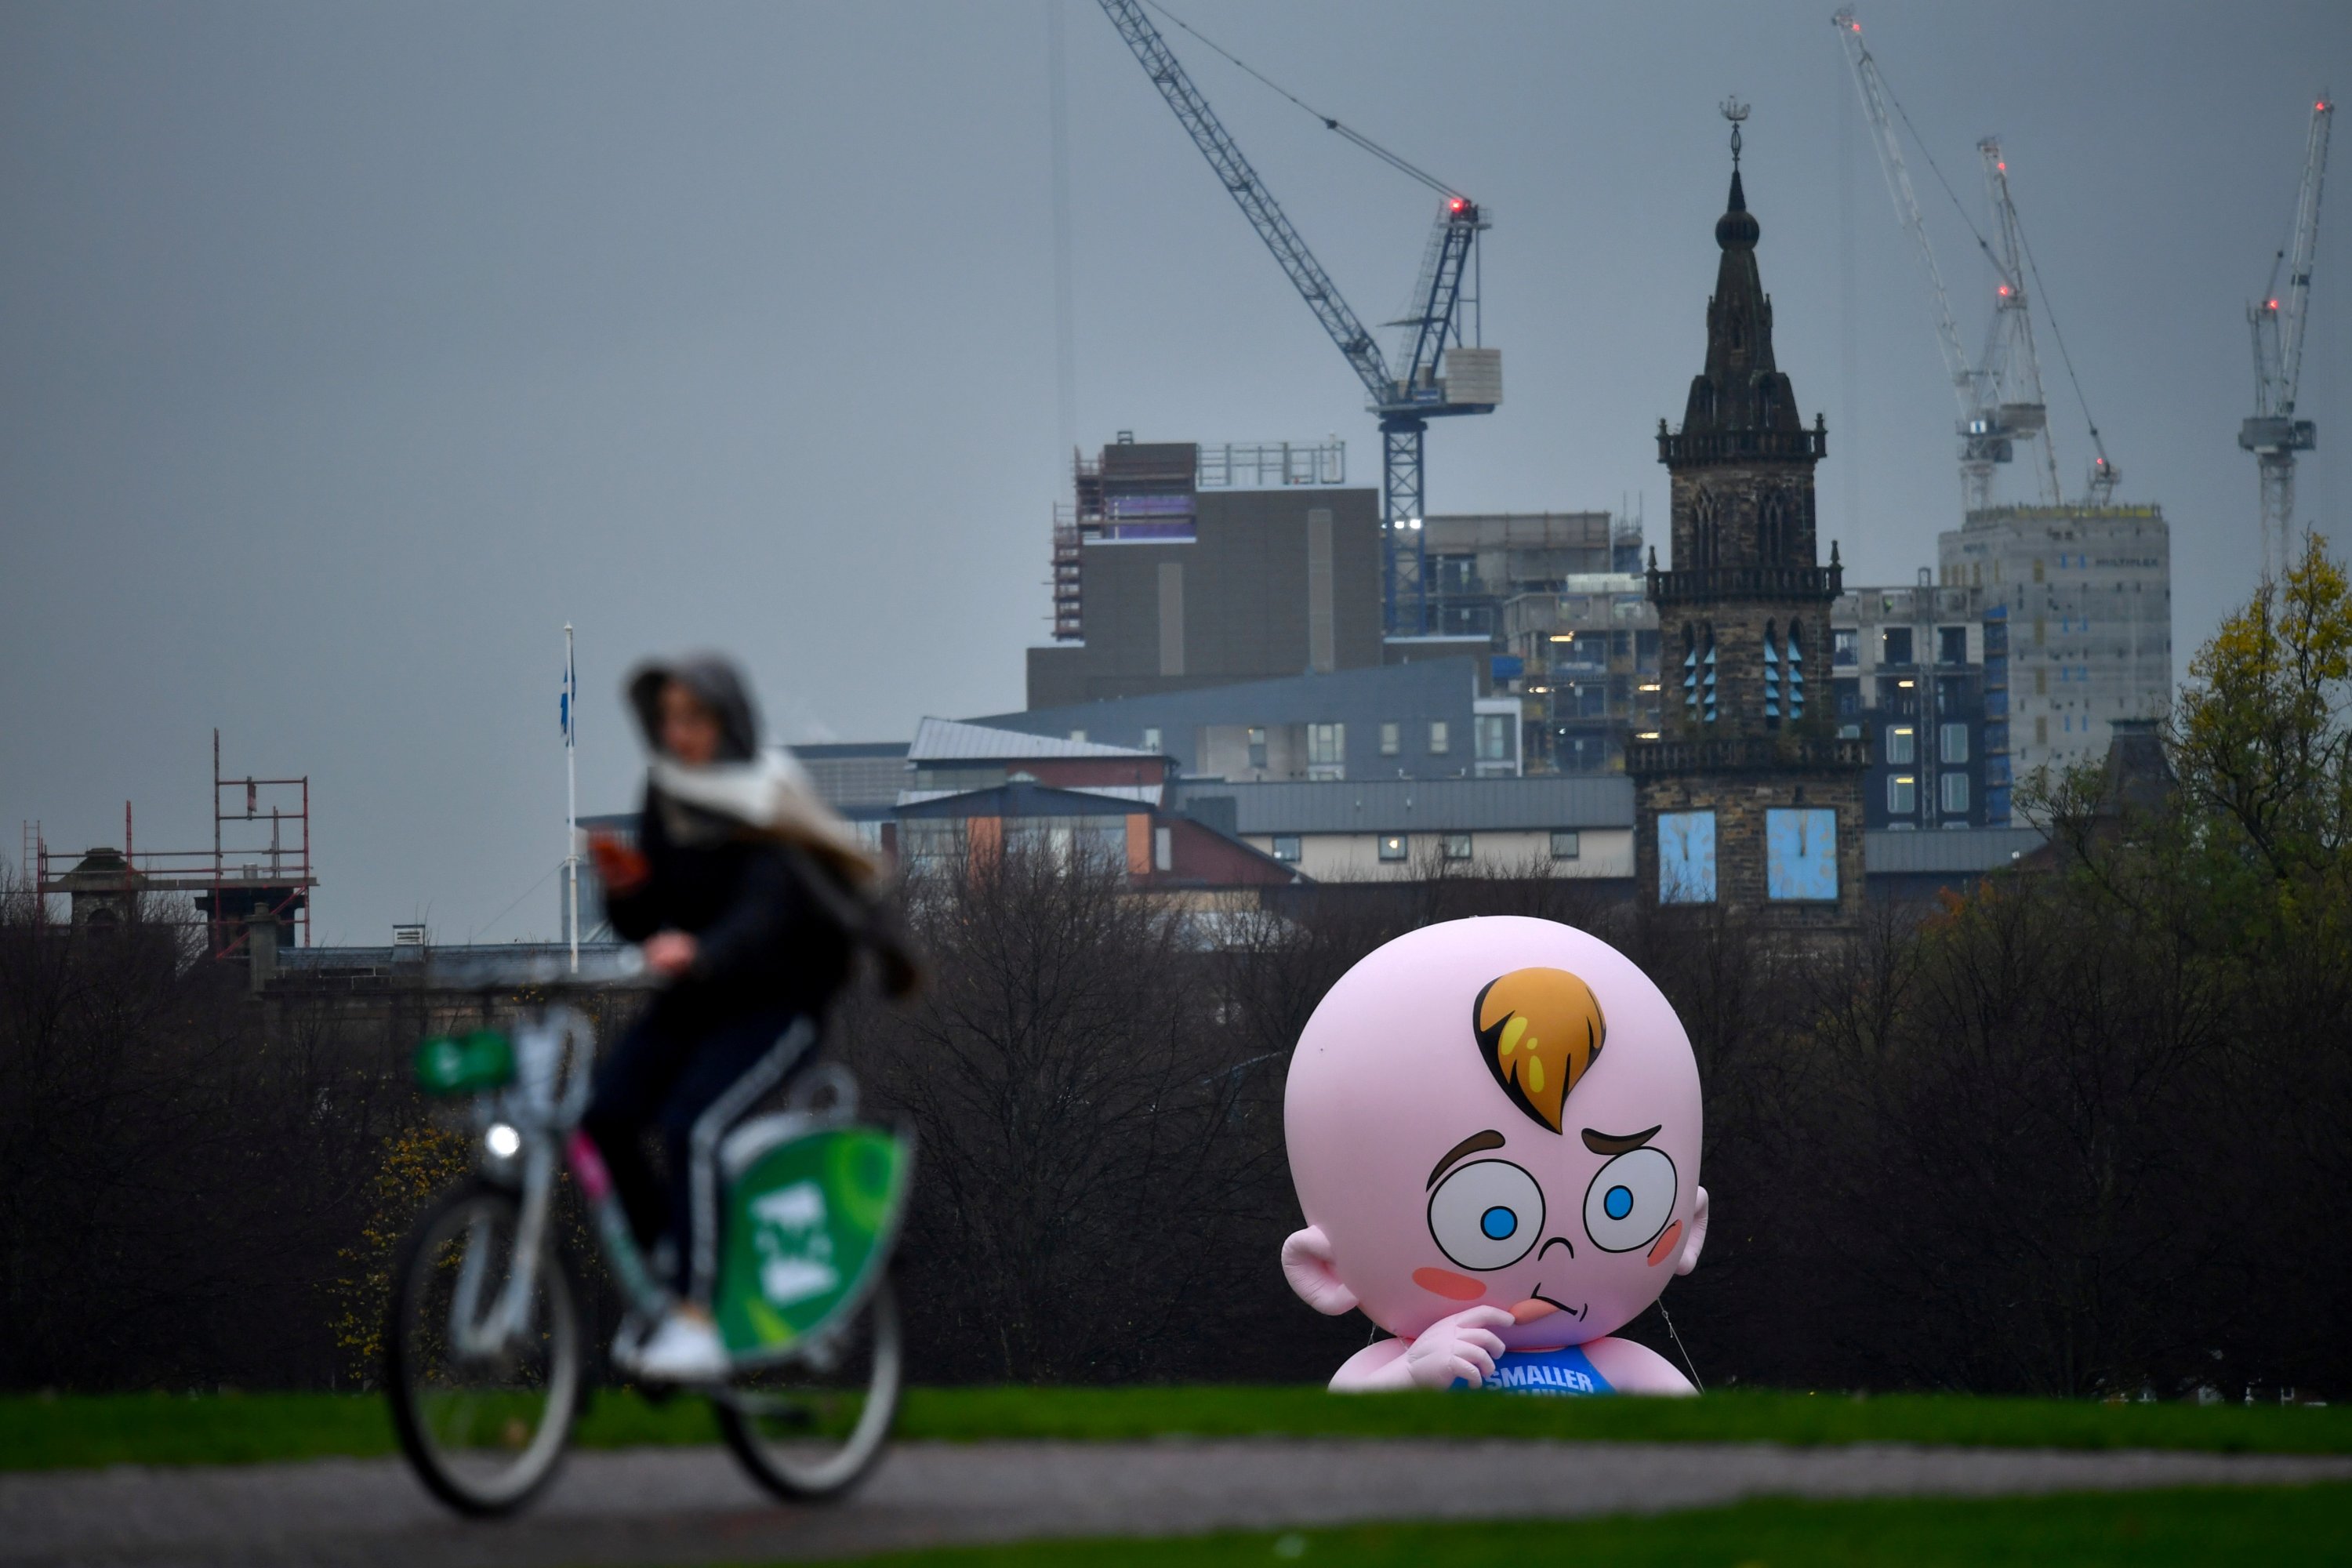 A giant baby balloon inflated by Climate Change activists is seen in the rain at Glasgow Green as the U.N. Climate Change Conference (COP26) takes place, in Glasgow, Scotland, U.K., Nov. 8, 2021. (Reuters Photo)